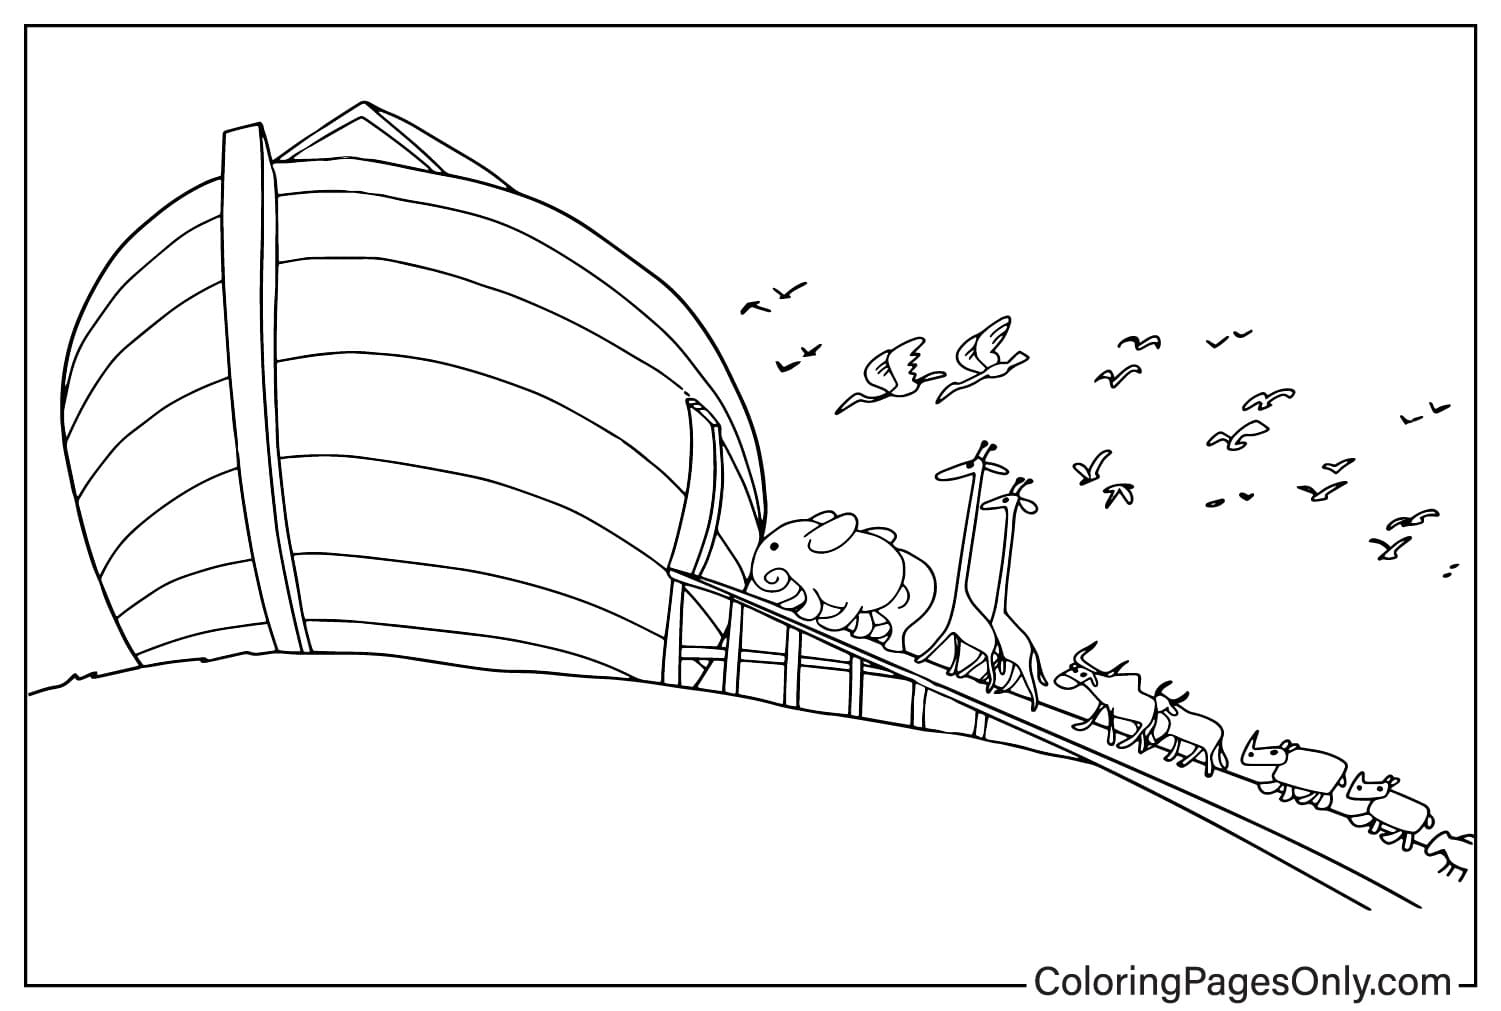 Noah Leading Animals into The Ark Coloring Page from Noah’s Ark